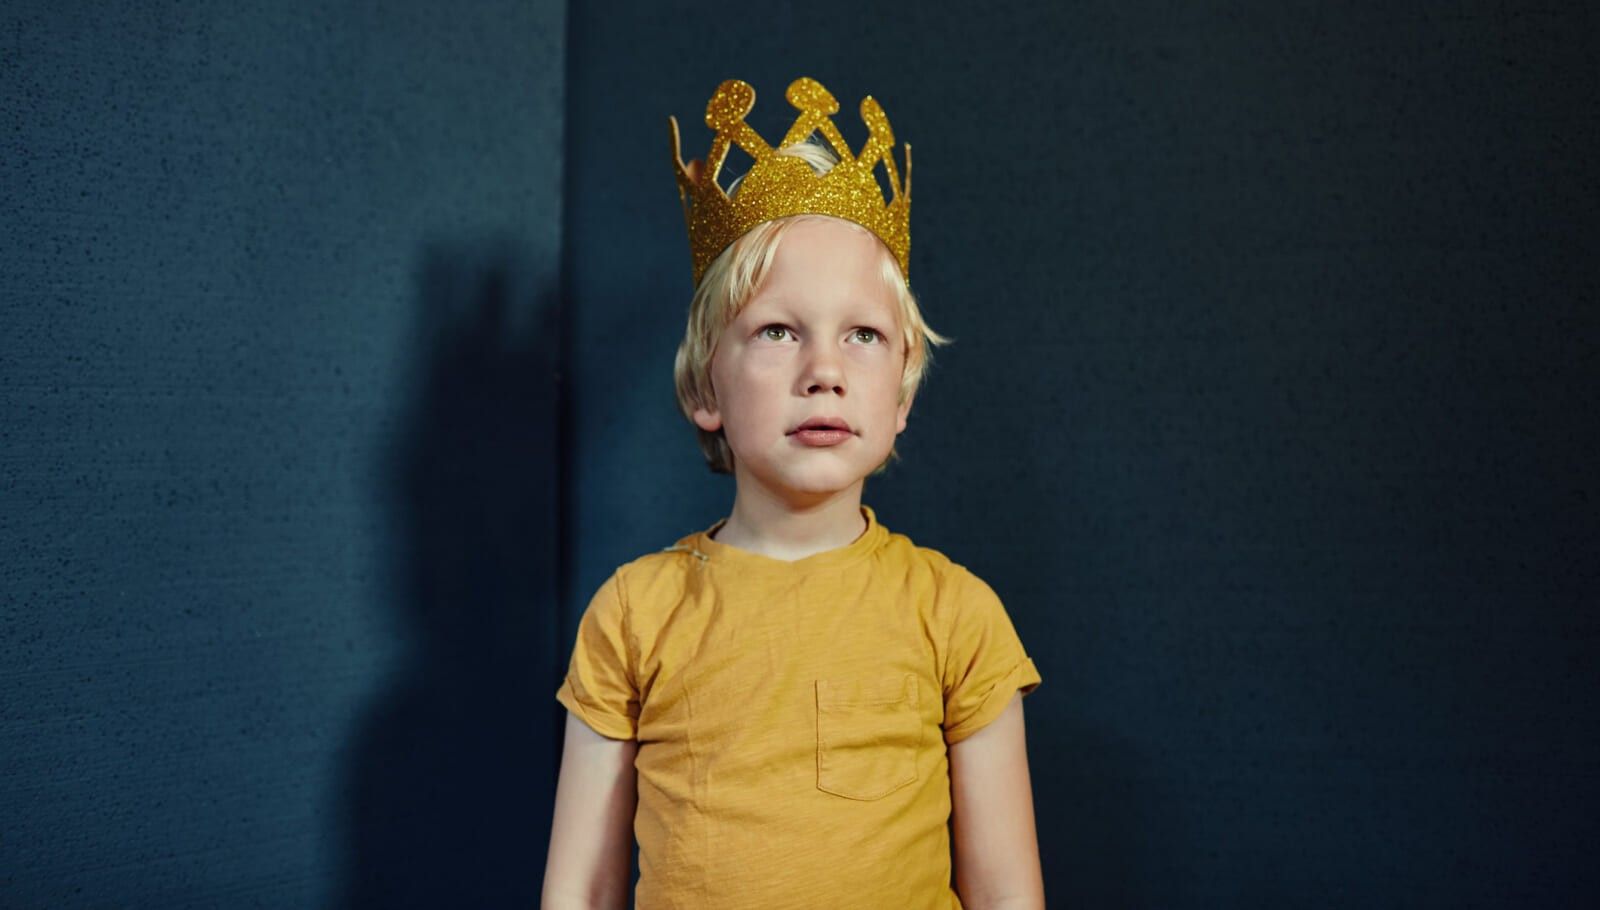 Portrait of a young boy wearing a gold crown party hat